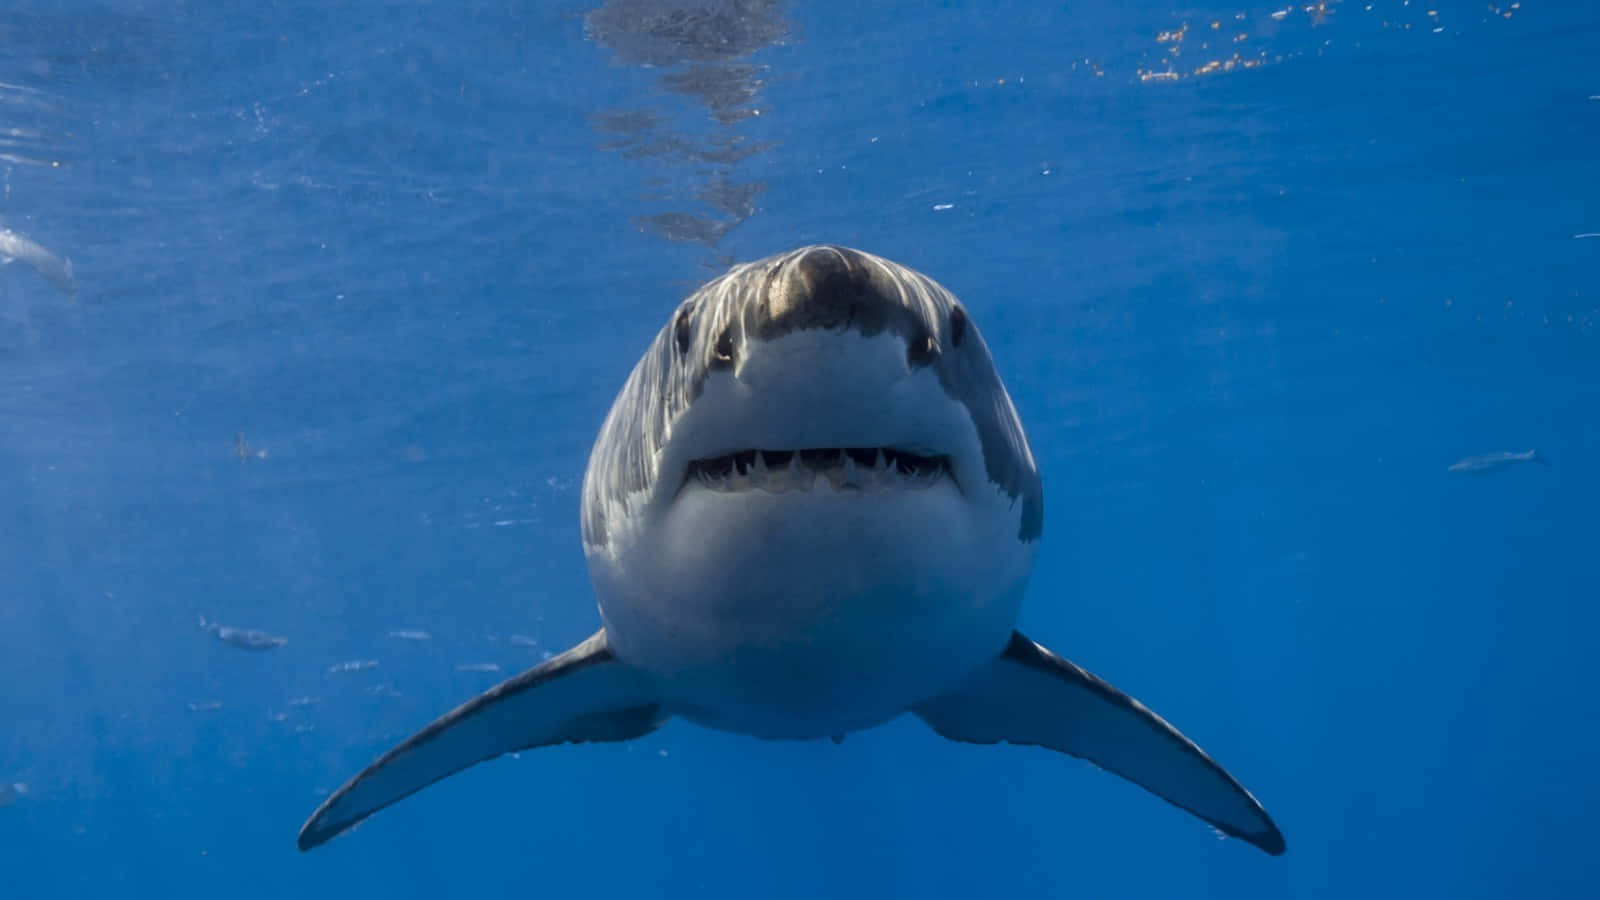 "The majestic Great White Shark"